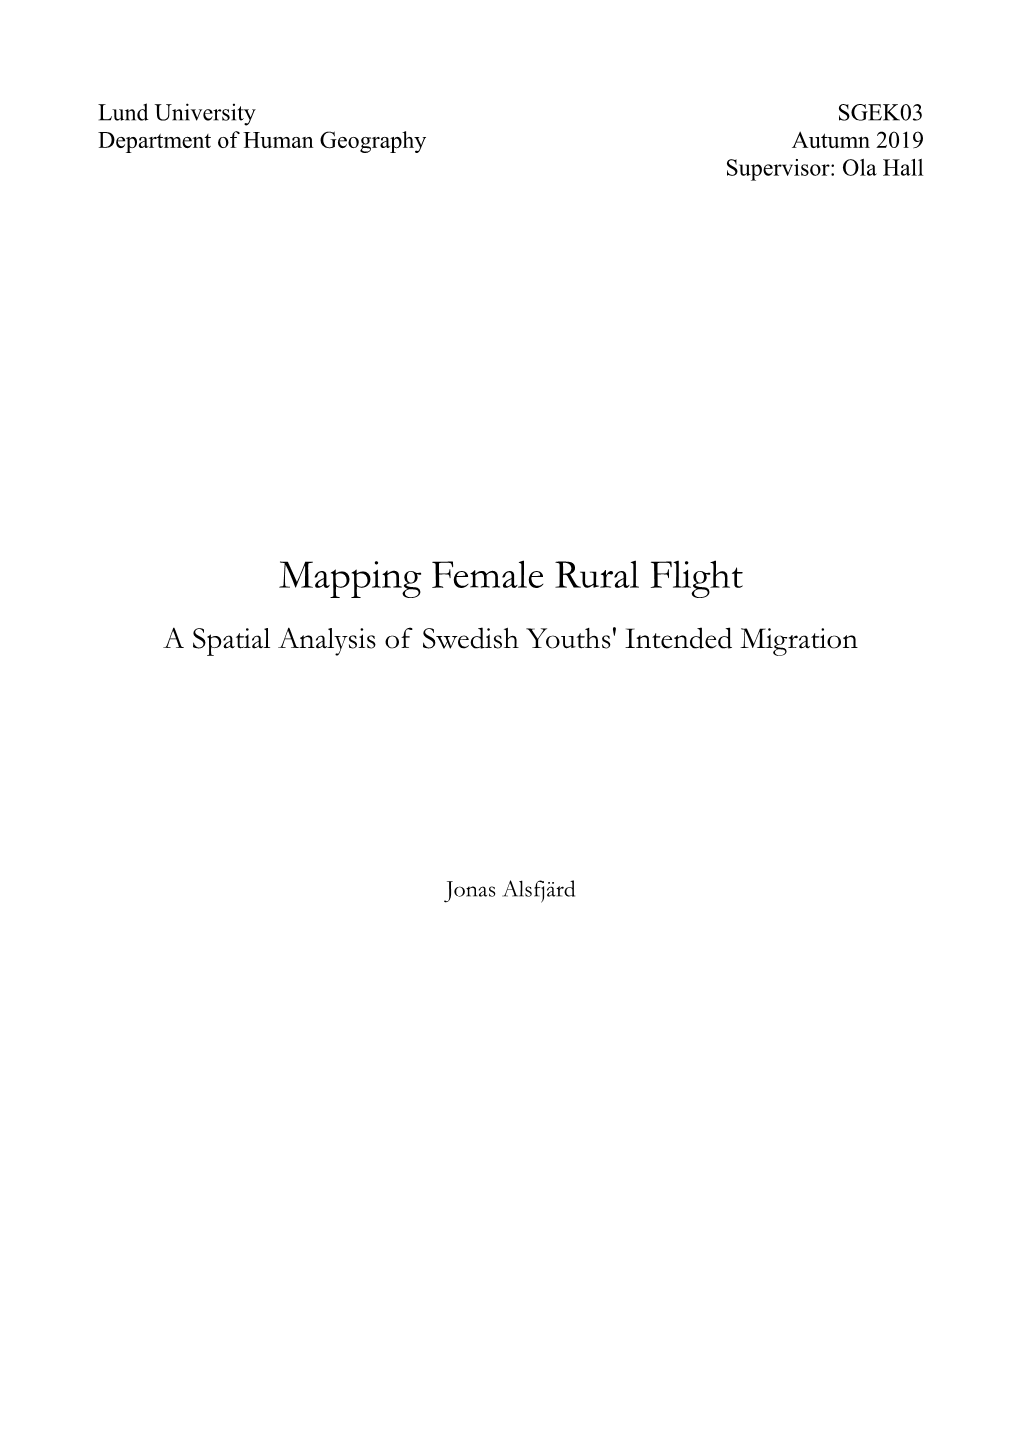 Mapping Female Rural Flight a Spatial Analysis of Swedish Youths' Intended Migration